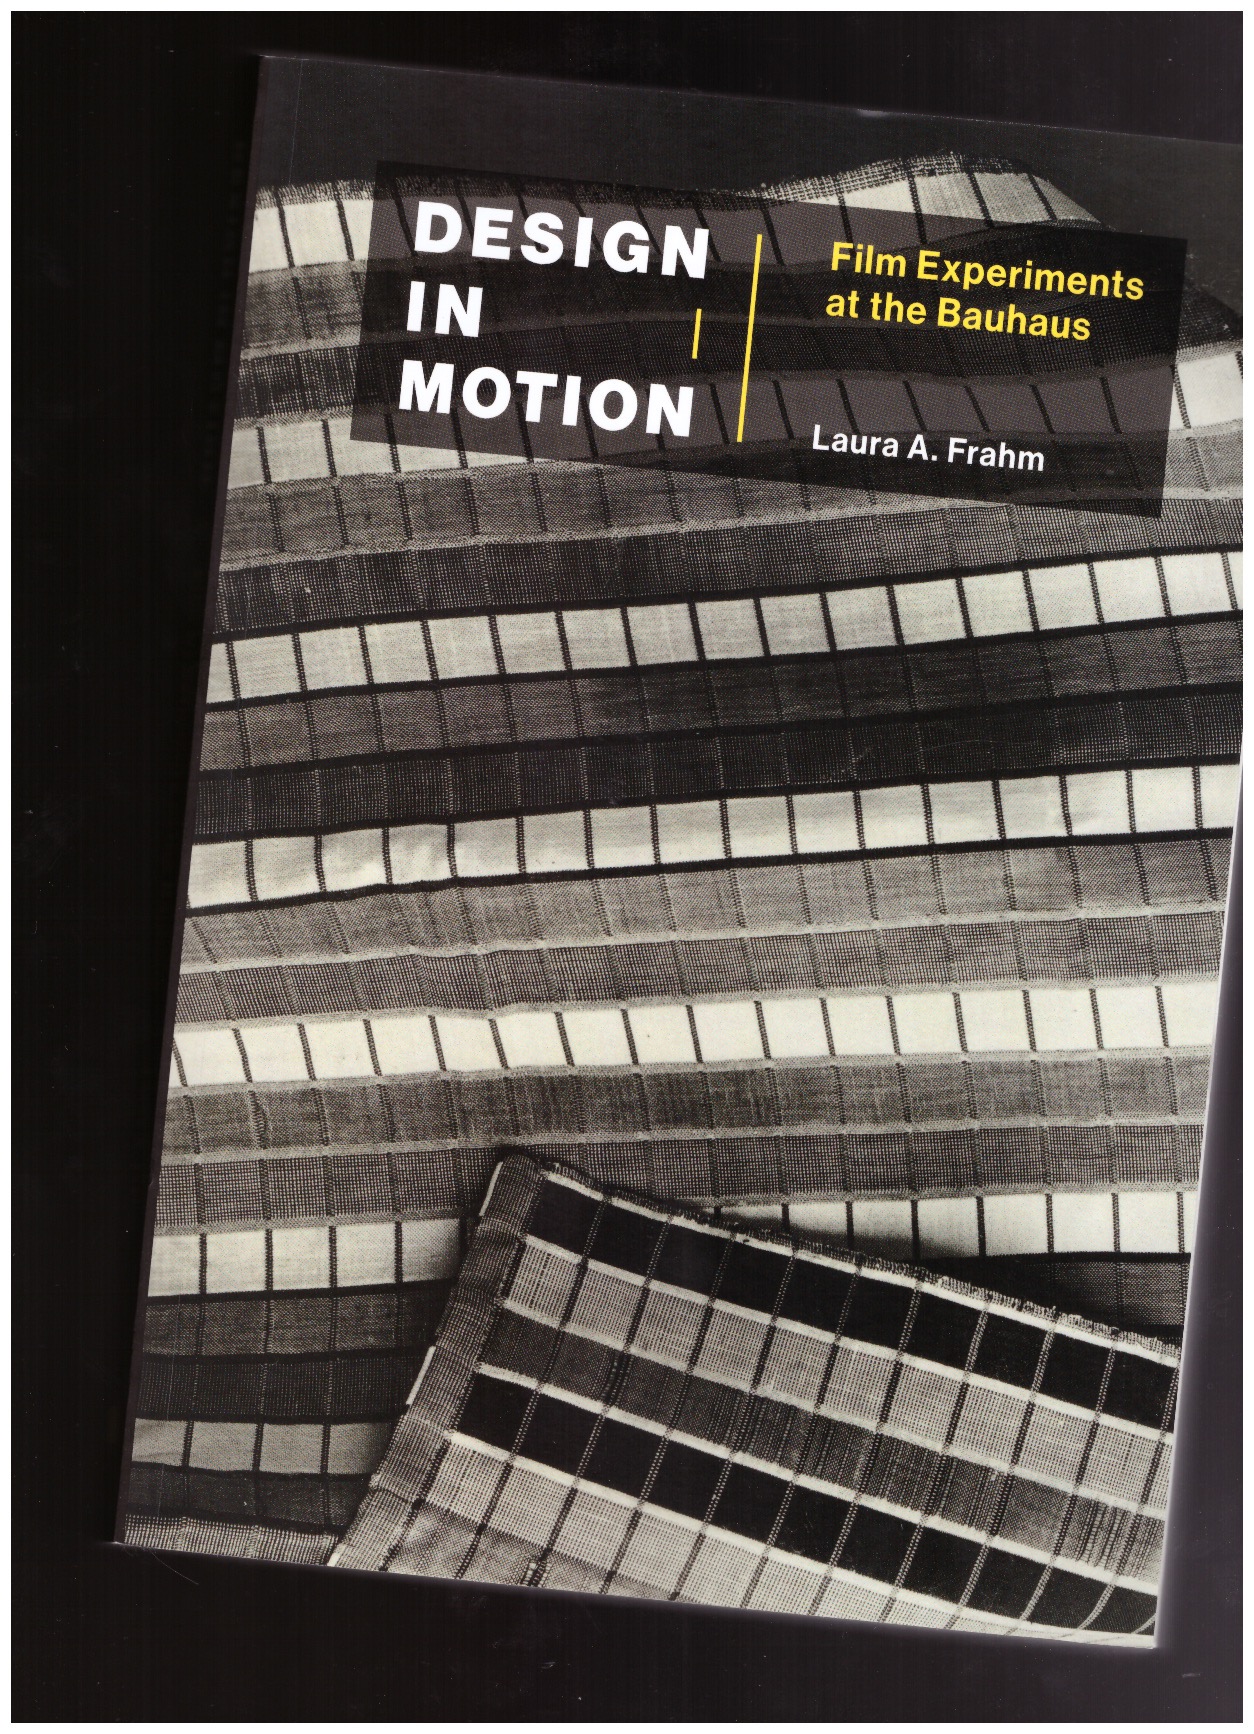 FRAHM, Laura A. - Design in Motion. Film Experiments at the Bauhaus